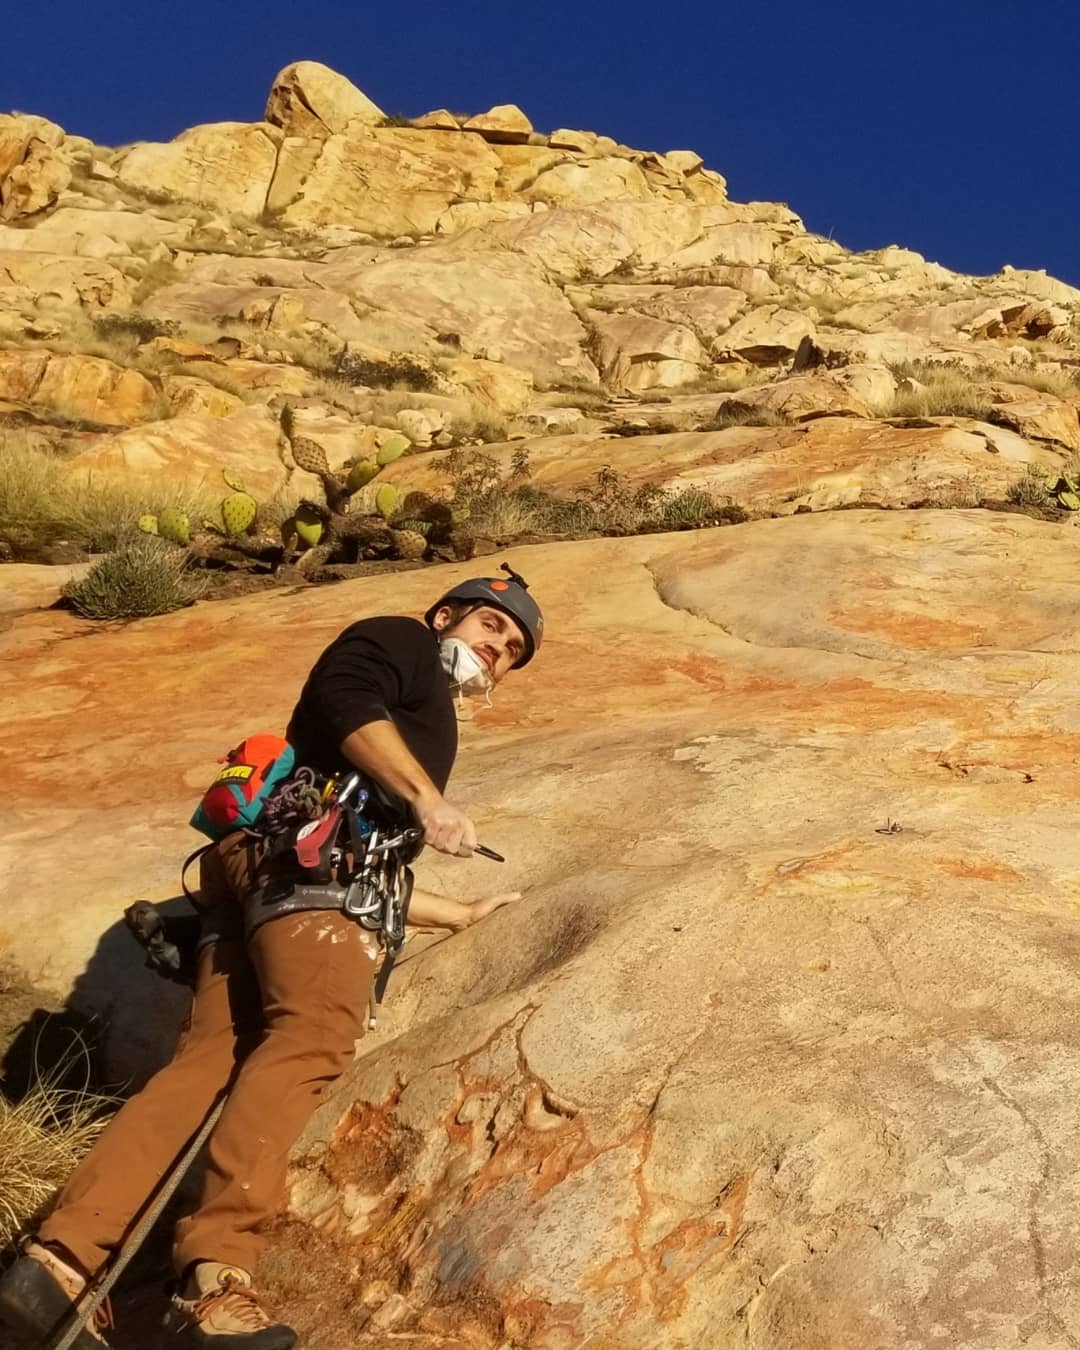 Exploring new terrain in San Diego. Last Friday we had the pleasure to check out a fairly new established route on the Mountaineer's wall of El Cajon Mountain"THE SLEEPING GIANT, 5.10a"With 10 pitches and a route length of 1,000 feet it can well be considered San Diego's longest multi pitch climb (that we know of).Together with @josh, we had to check it out and see what "SAN DIEGO'S LONGEST CLIMB" is all about.And we want to say many thanks and express gratitude to the first ascentionists and local developers  who made this climb (and so many others) come alive and enjoyable for many climbers generations ahead.Please check out our story later today for a full length documentation of the route + hints, tips and beta on all the pitches.️️️BETA ALERT️️️DO NOT CHECK THE STORY IF YOU PLAN TO ONSIGHT THE CLIMB....#chillinorockclimbing #sandiego #chillinoguides #rockclimbing #rock_climbing_pictures_of_instagram #optoutside #guide #beta #climbinglife #byclimbersforclimbers #passion #roots #community #lifestories #real...@chbard @randyleavitt @eldorado_rugs @the_cosmic_climber @brischillings_music @william_helmer @gregasaurus_flex @mesarimclimbing @mesarim_mv @mateoway88